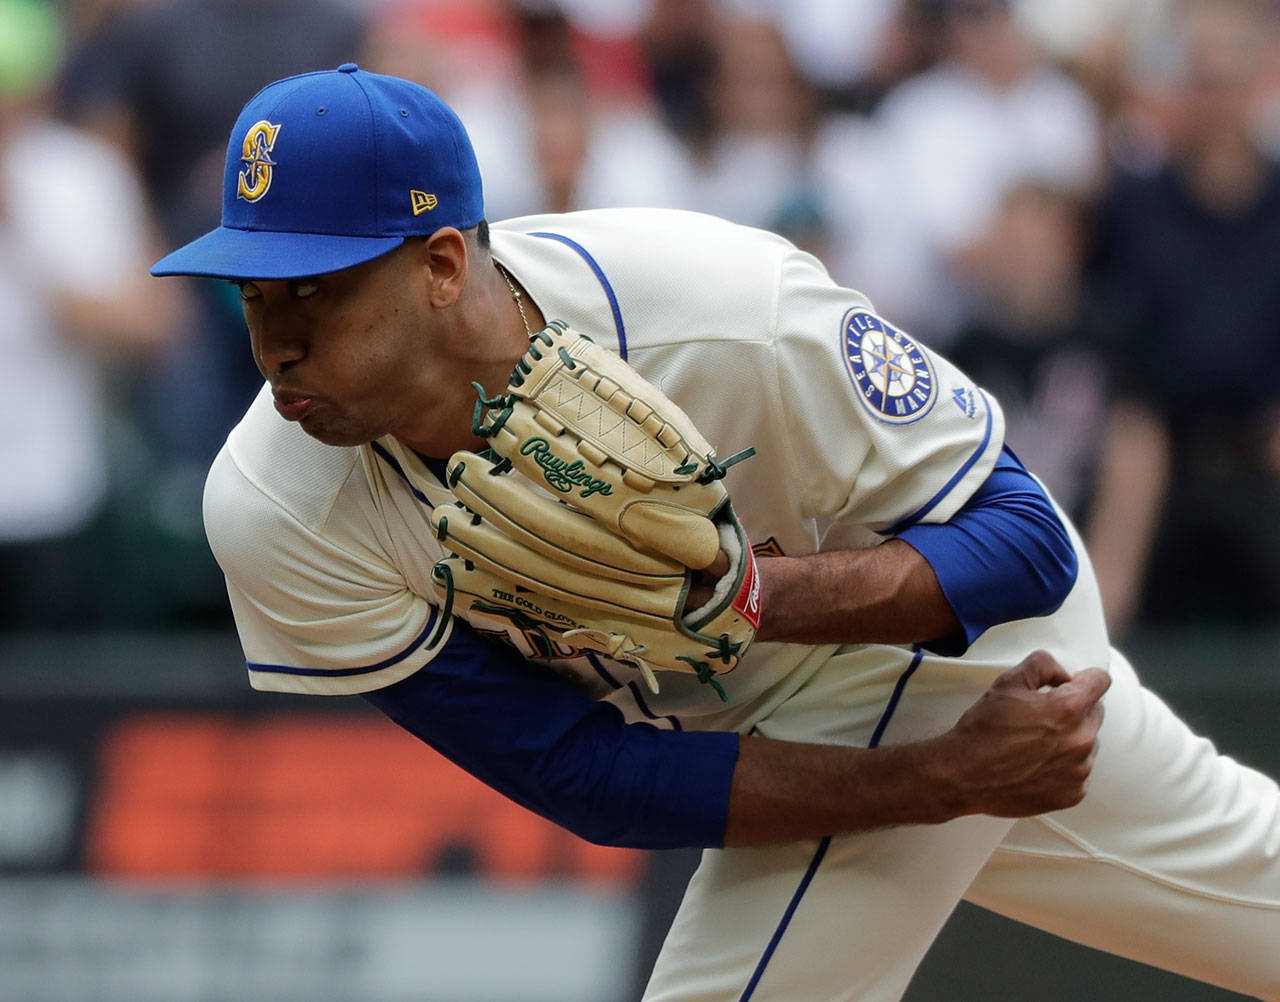 Mariners closer Edwin Diaz named AL reliever of the month